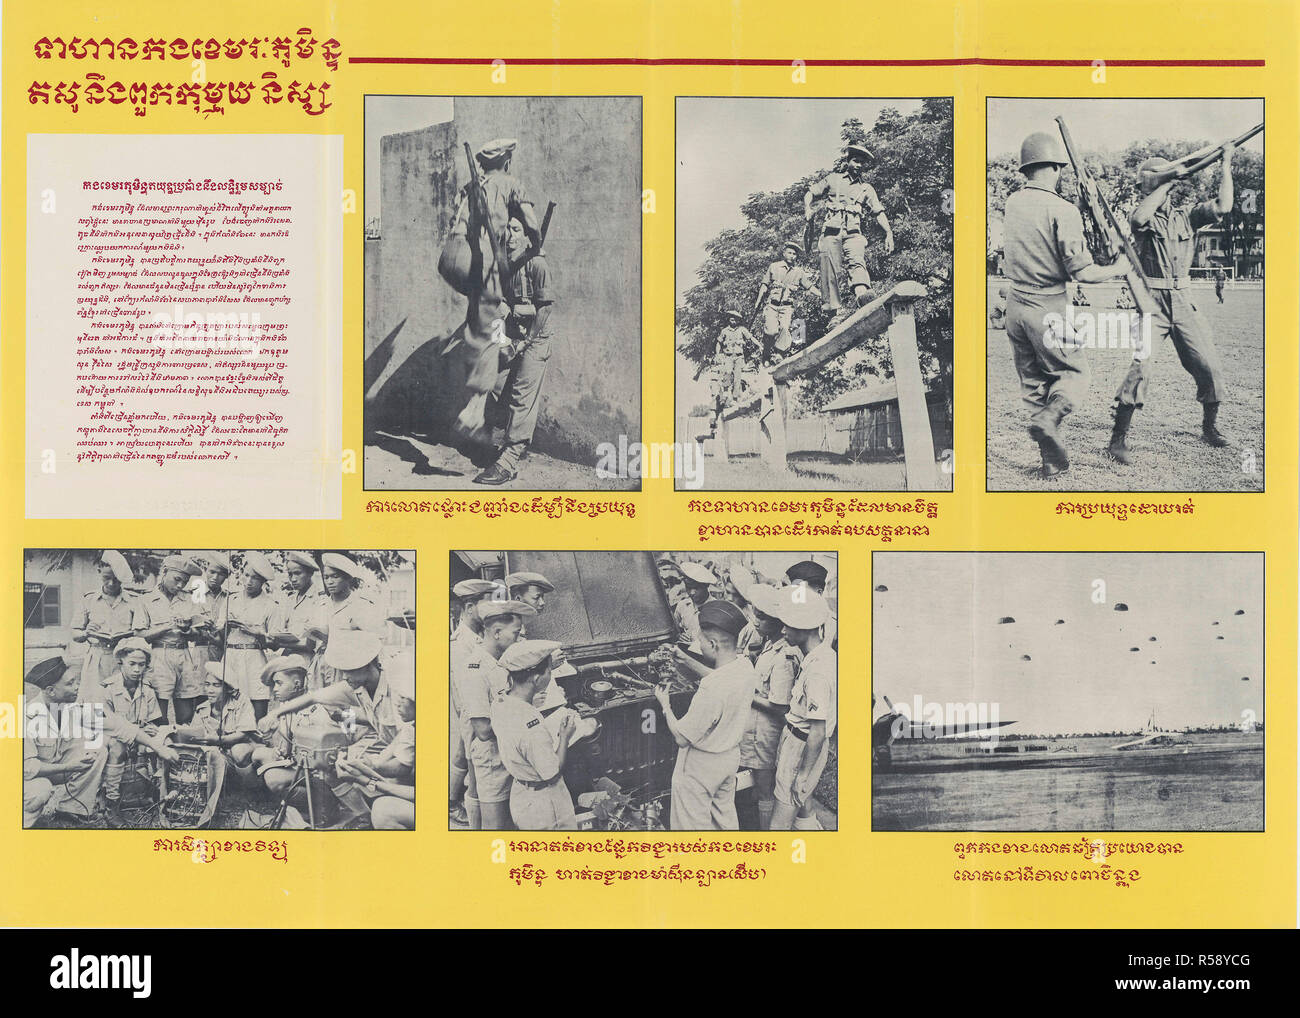 6/3/1952 - U.S. Propaganda Posters in 1950s Asia - Cambodian Army Vs. Communists Poster (written in Khmer) Stock Photo